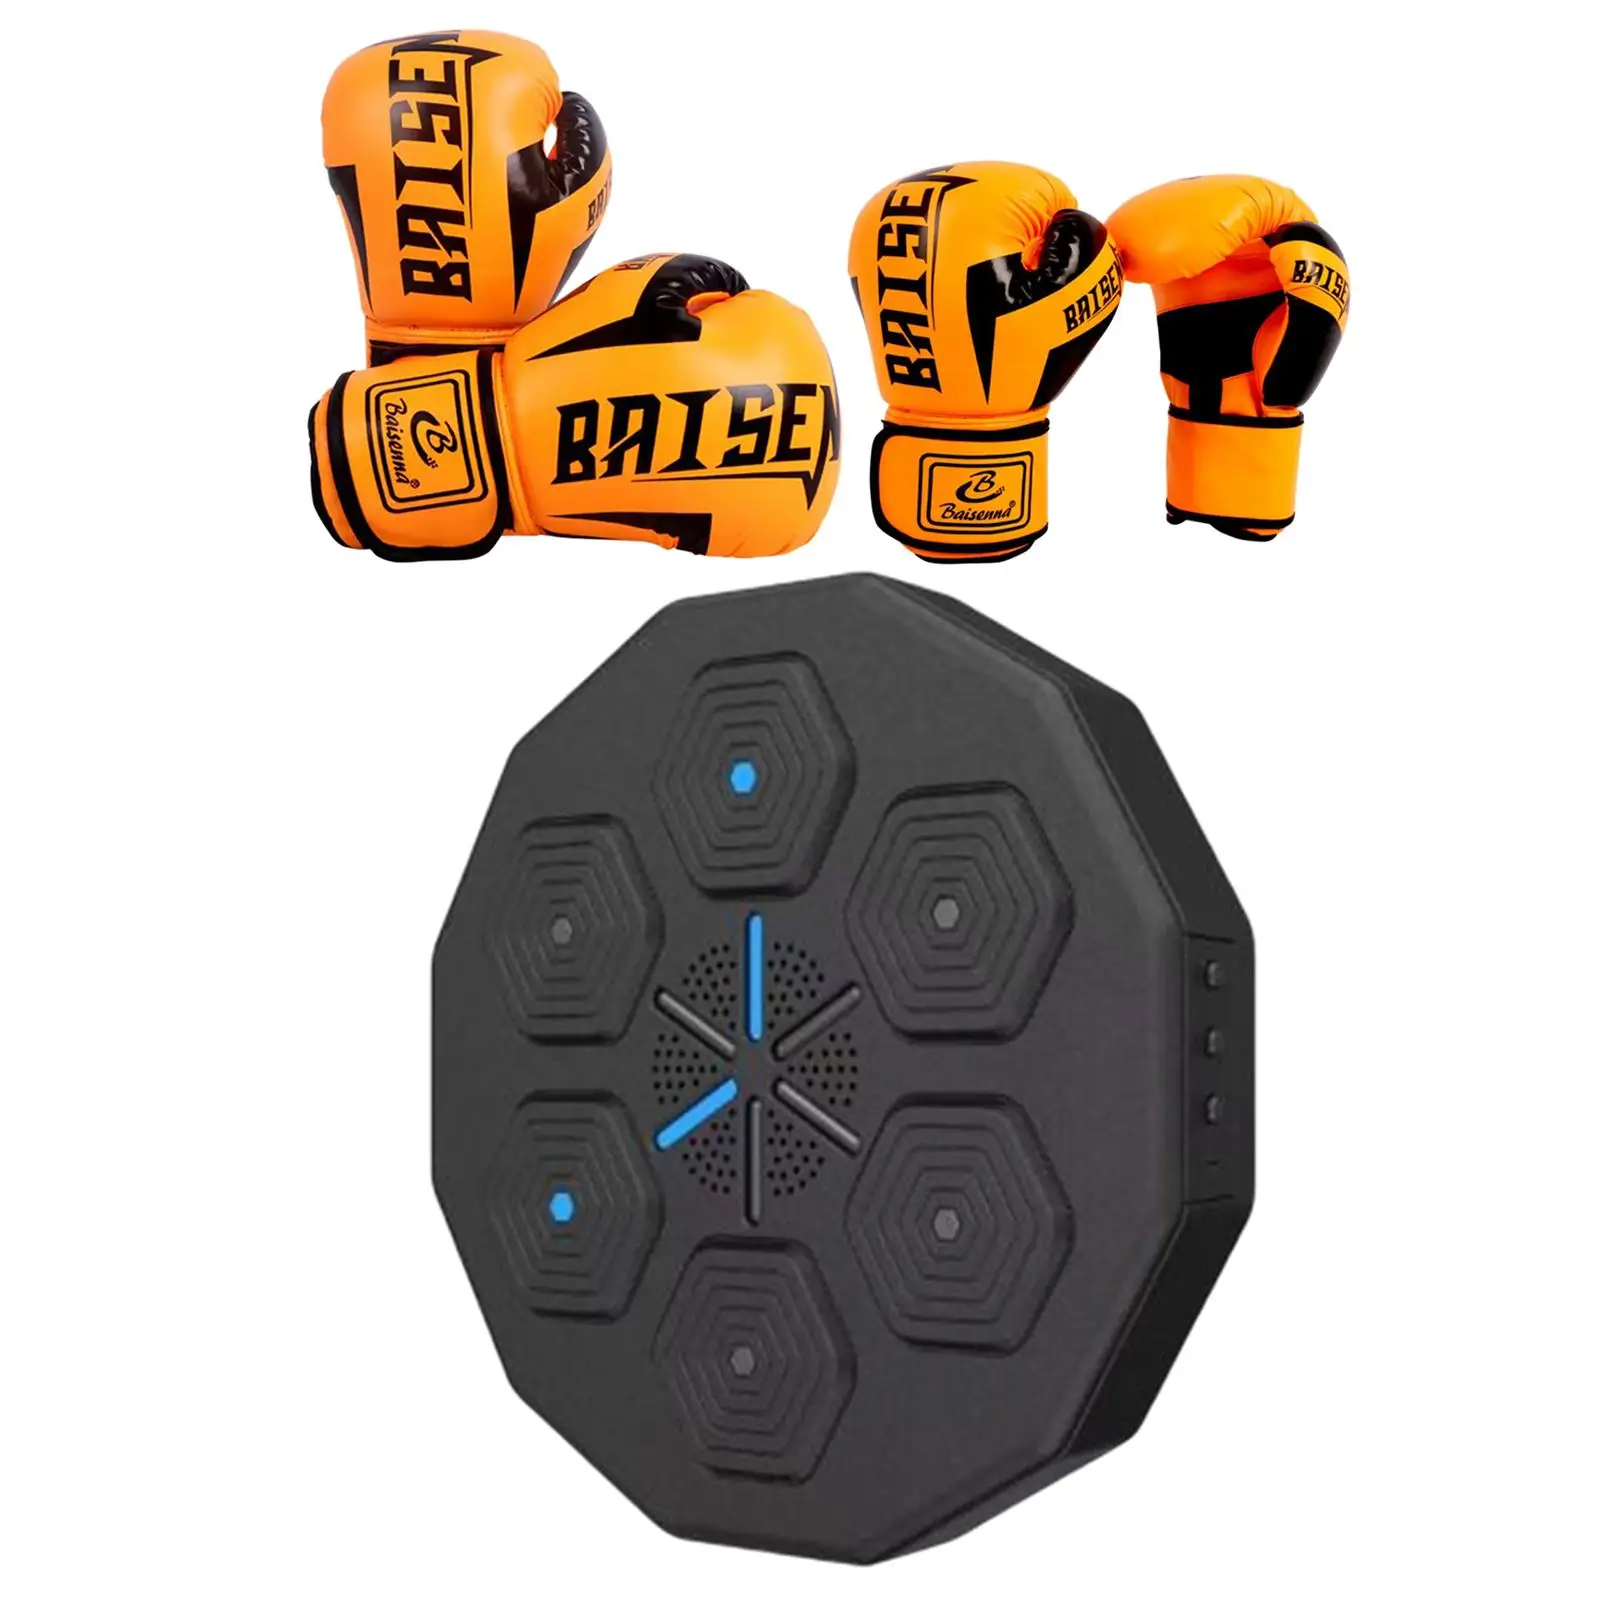 Music Boxing Machine Wall Target Boxing Trainer Wall Mounted Reaction Target Equipment with Gloves Punching Pad for Exercise